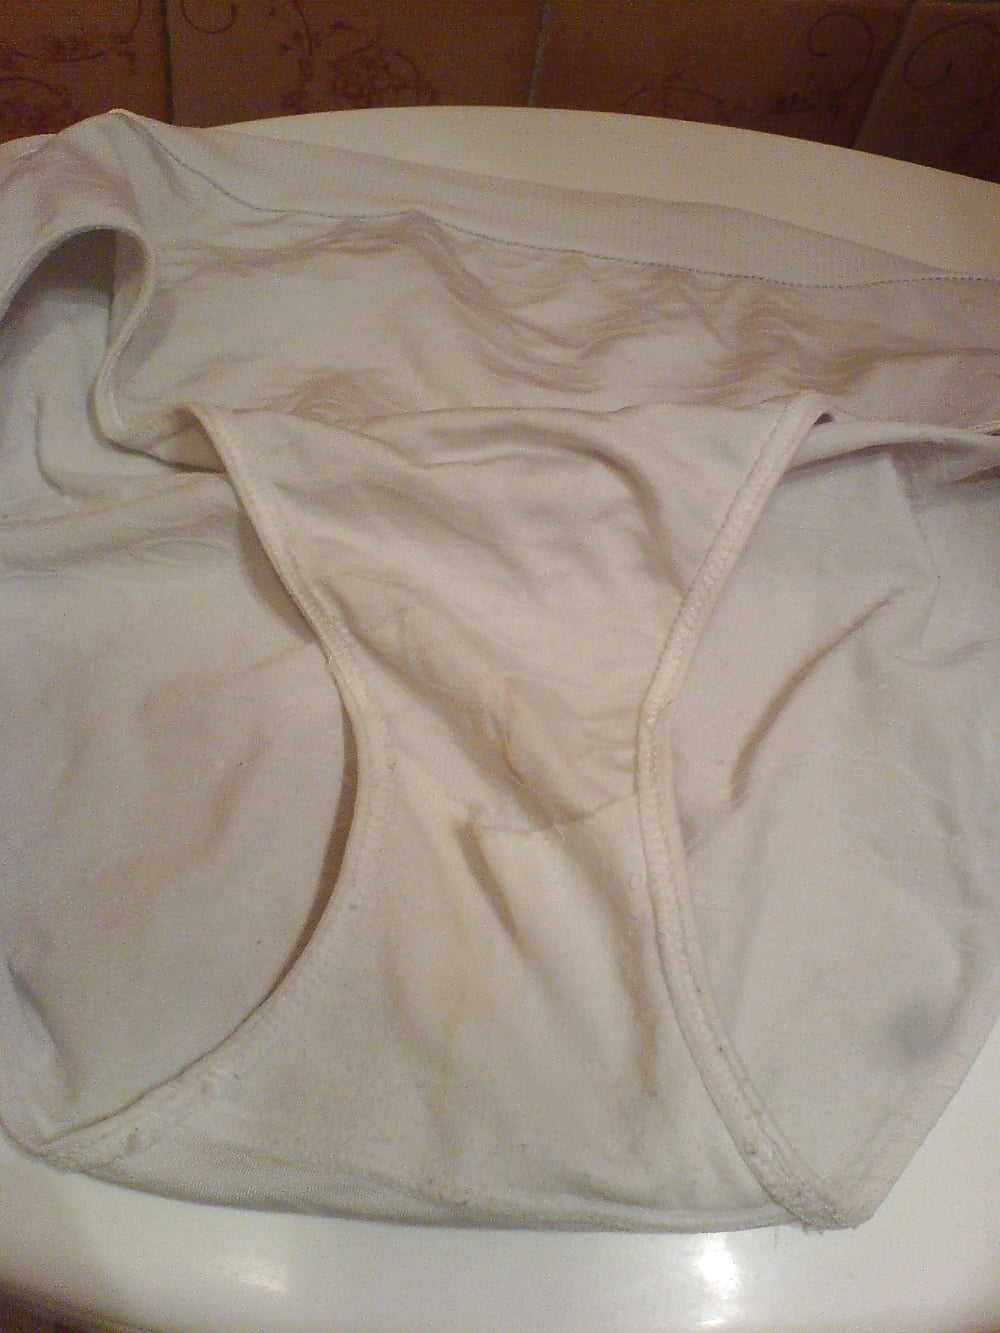 dirty panties 61 year-old lady